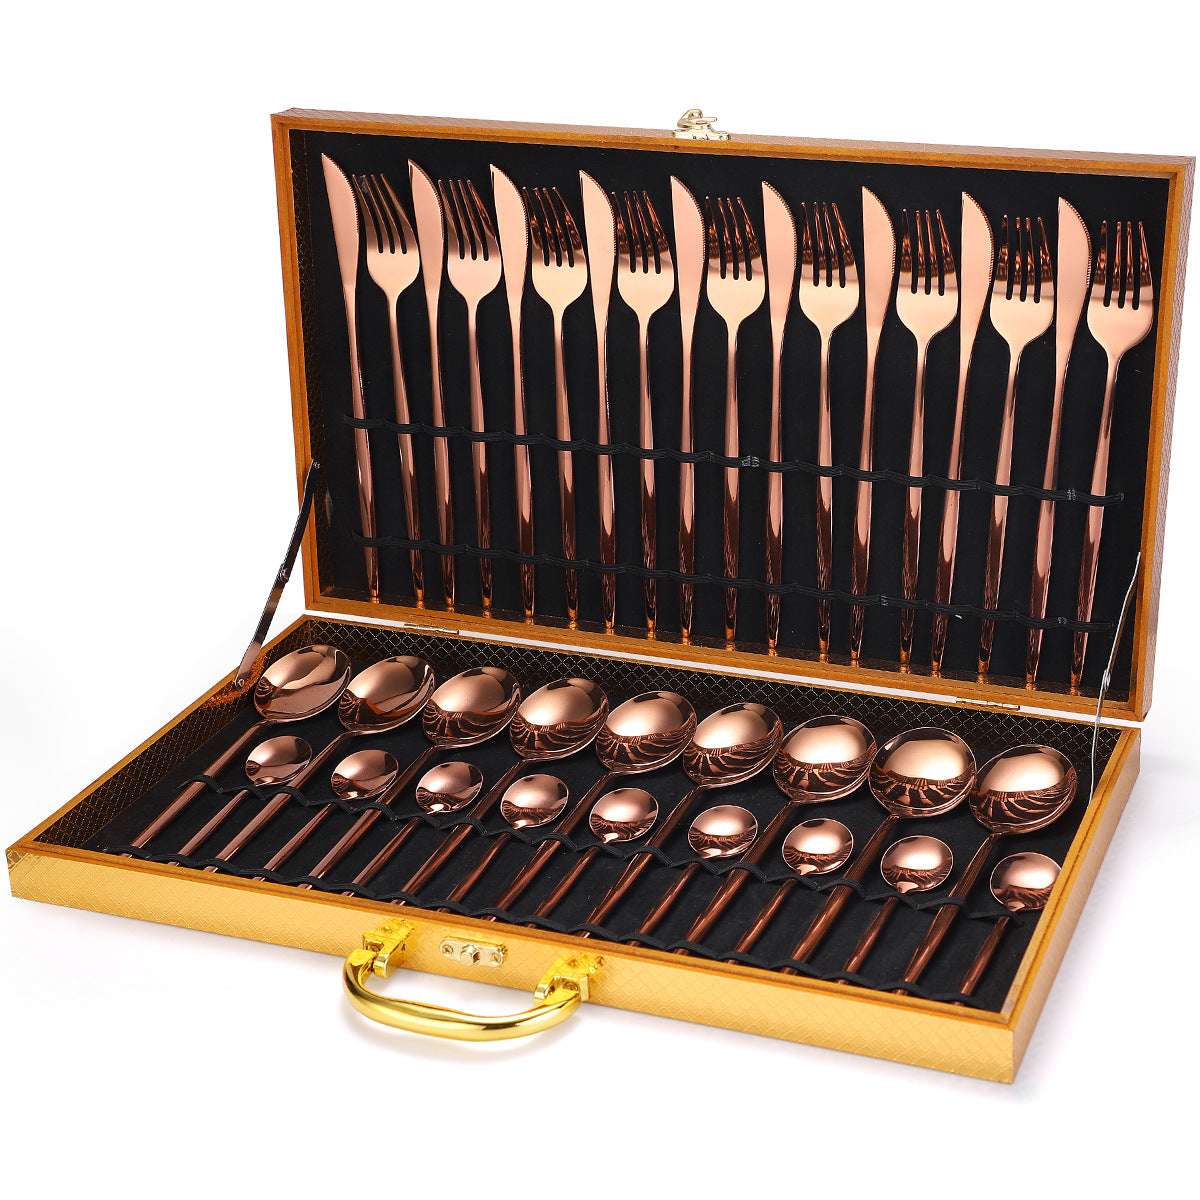 36-piece stainless steel cutlery set in a wooden box as a gift set